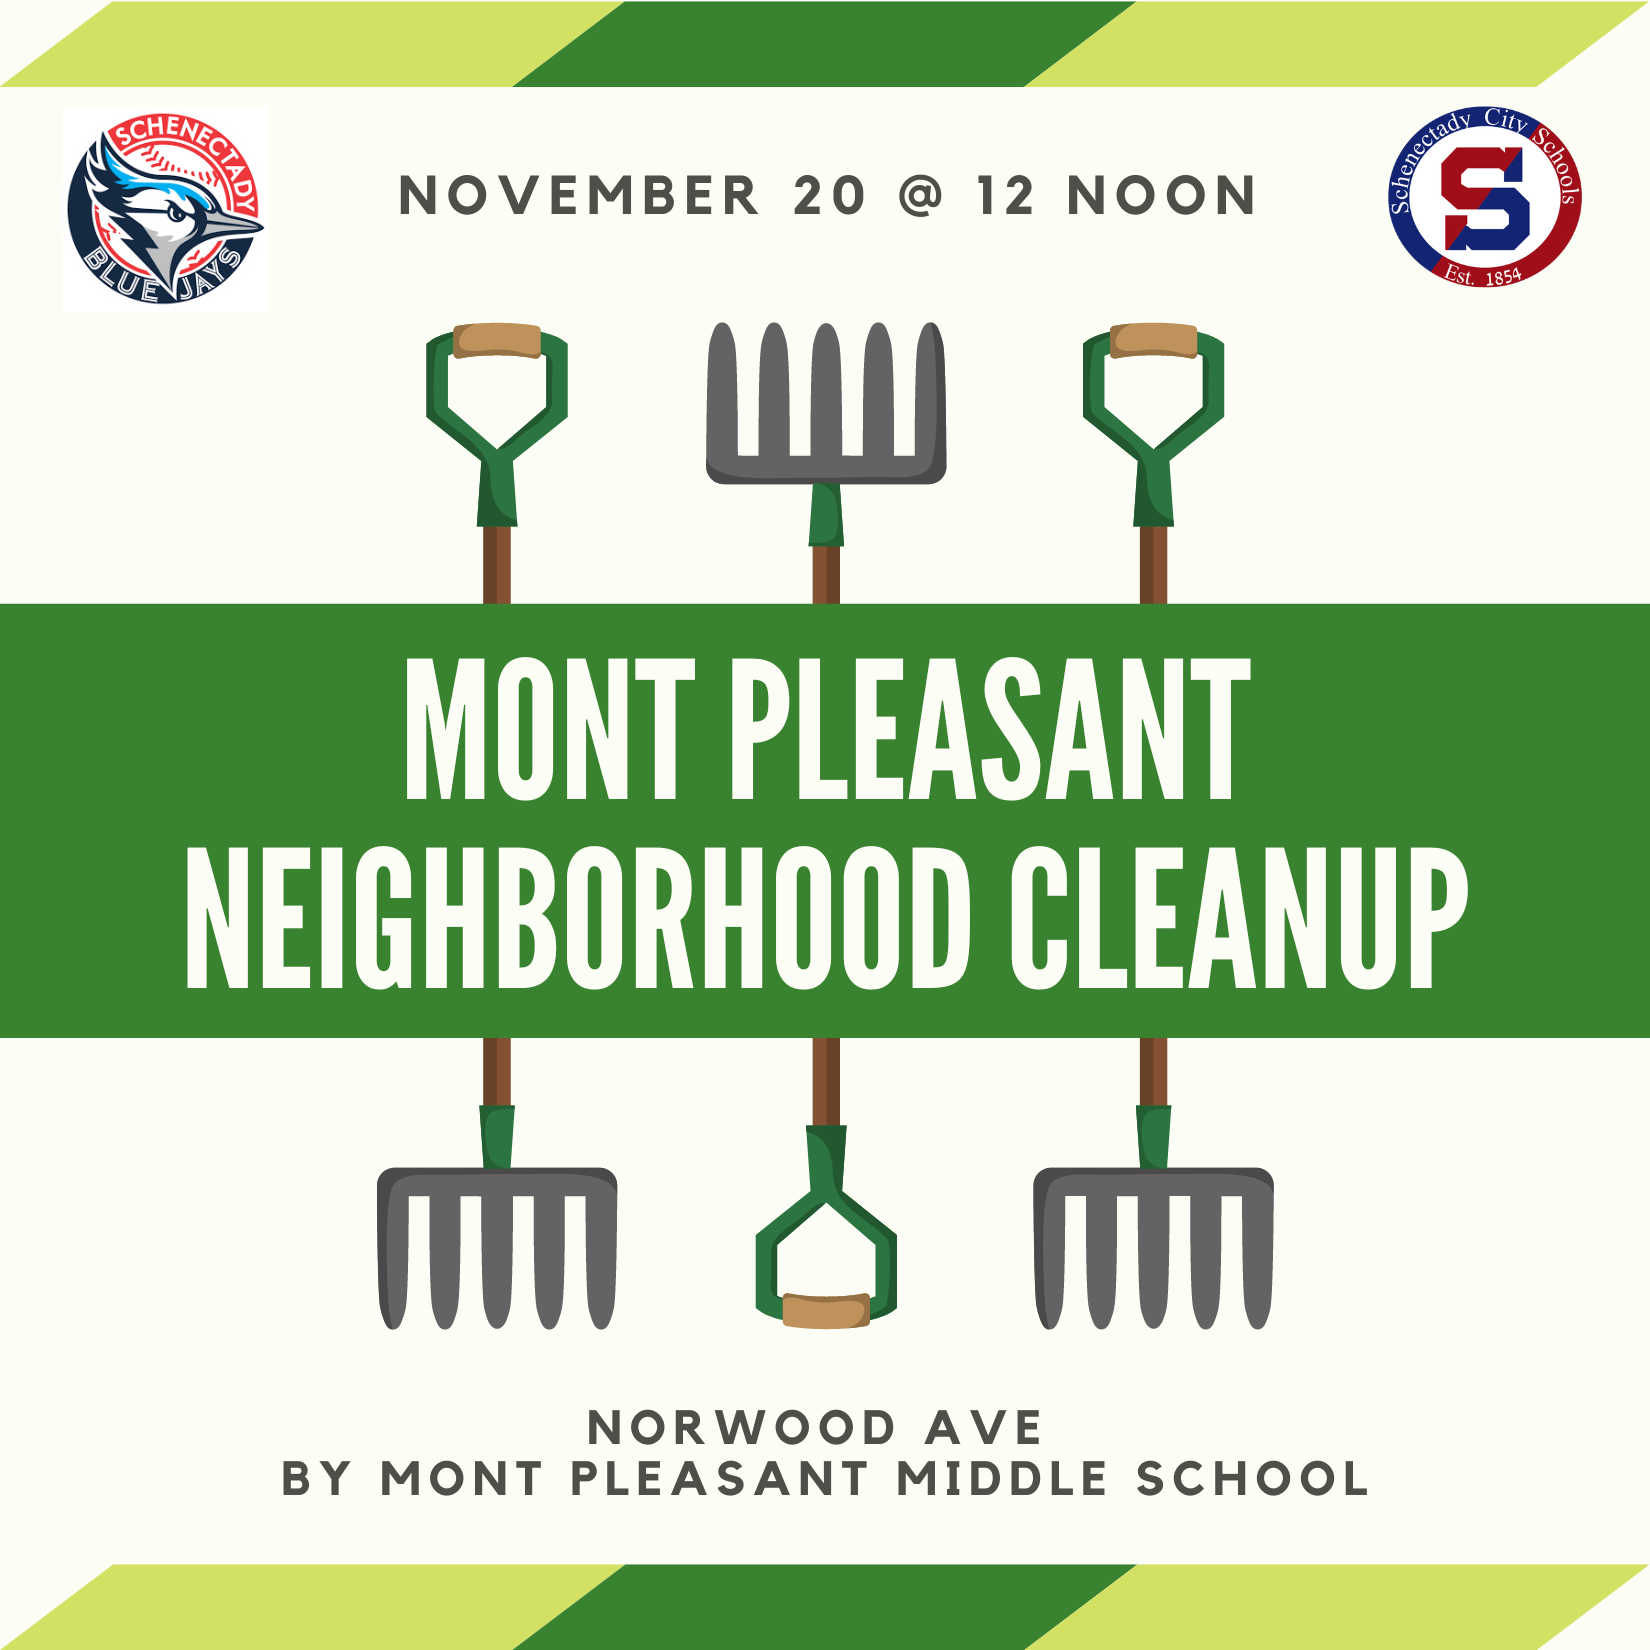 The Schenectady Blue Jays are teaming up with our district, the City of Schenectady, and multiple Schenectady Youth Sports Leagues to clean up the fence line on Norwood Ave by Mont Pleasant Middle School on Sunday at noon.